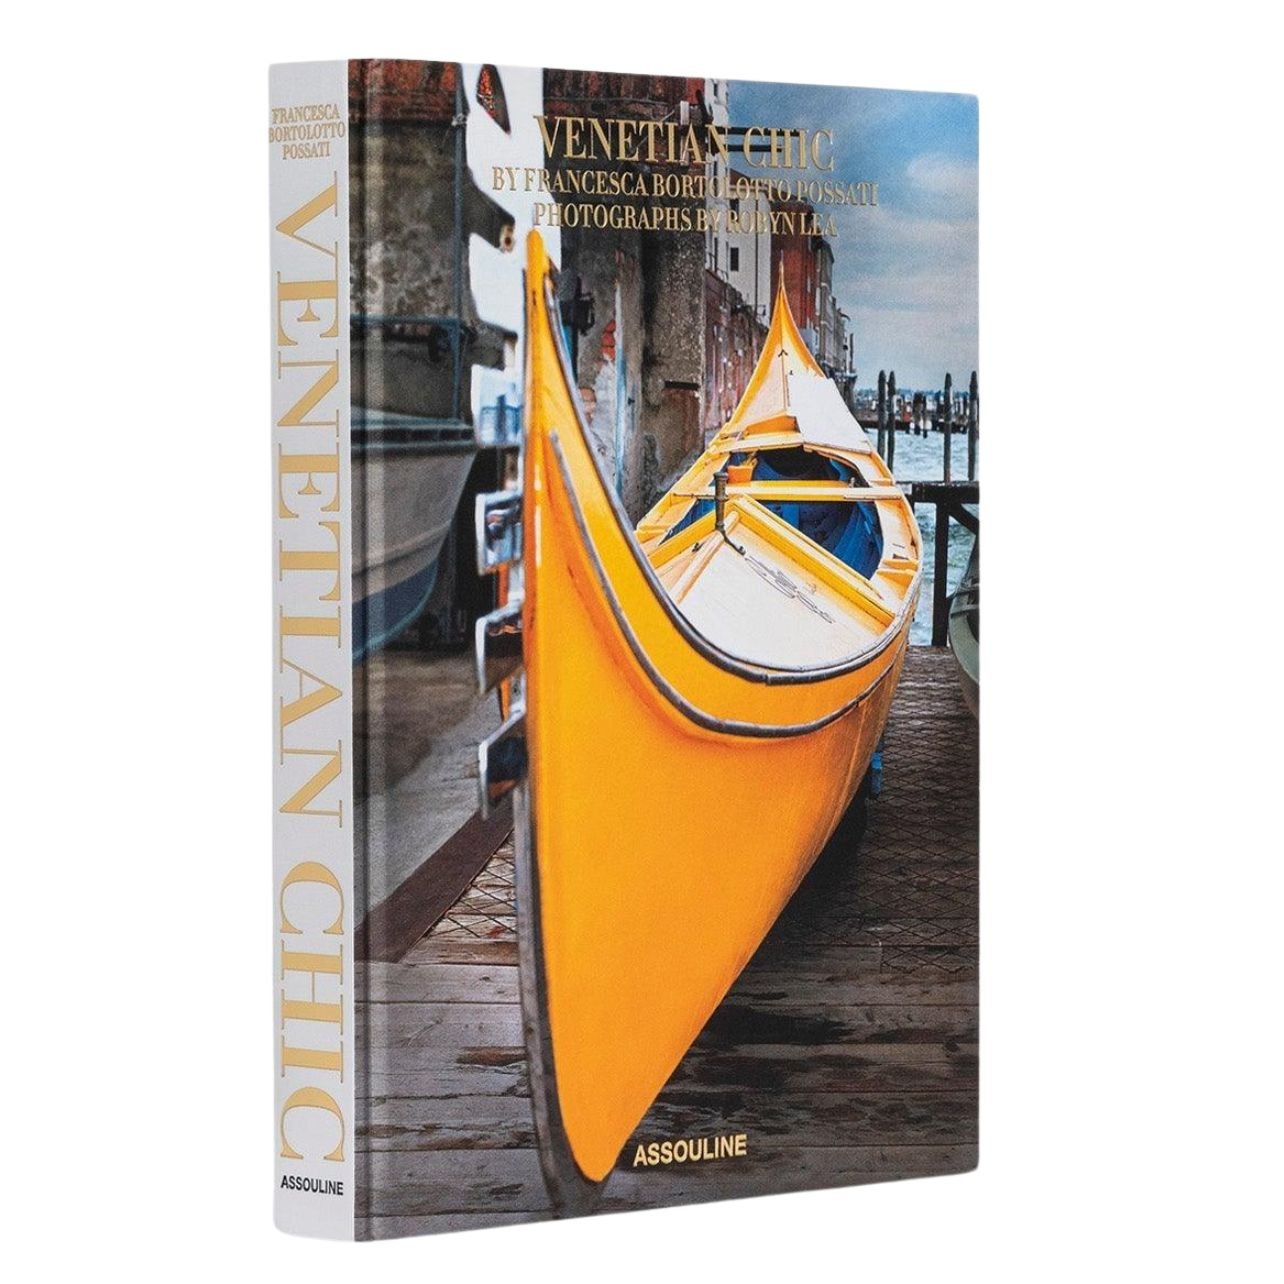 Coffee Table Book with Gondola on the cover